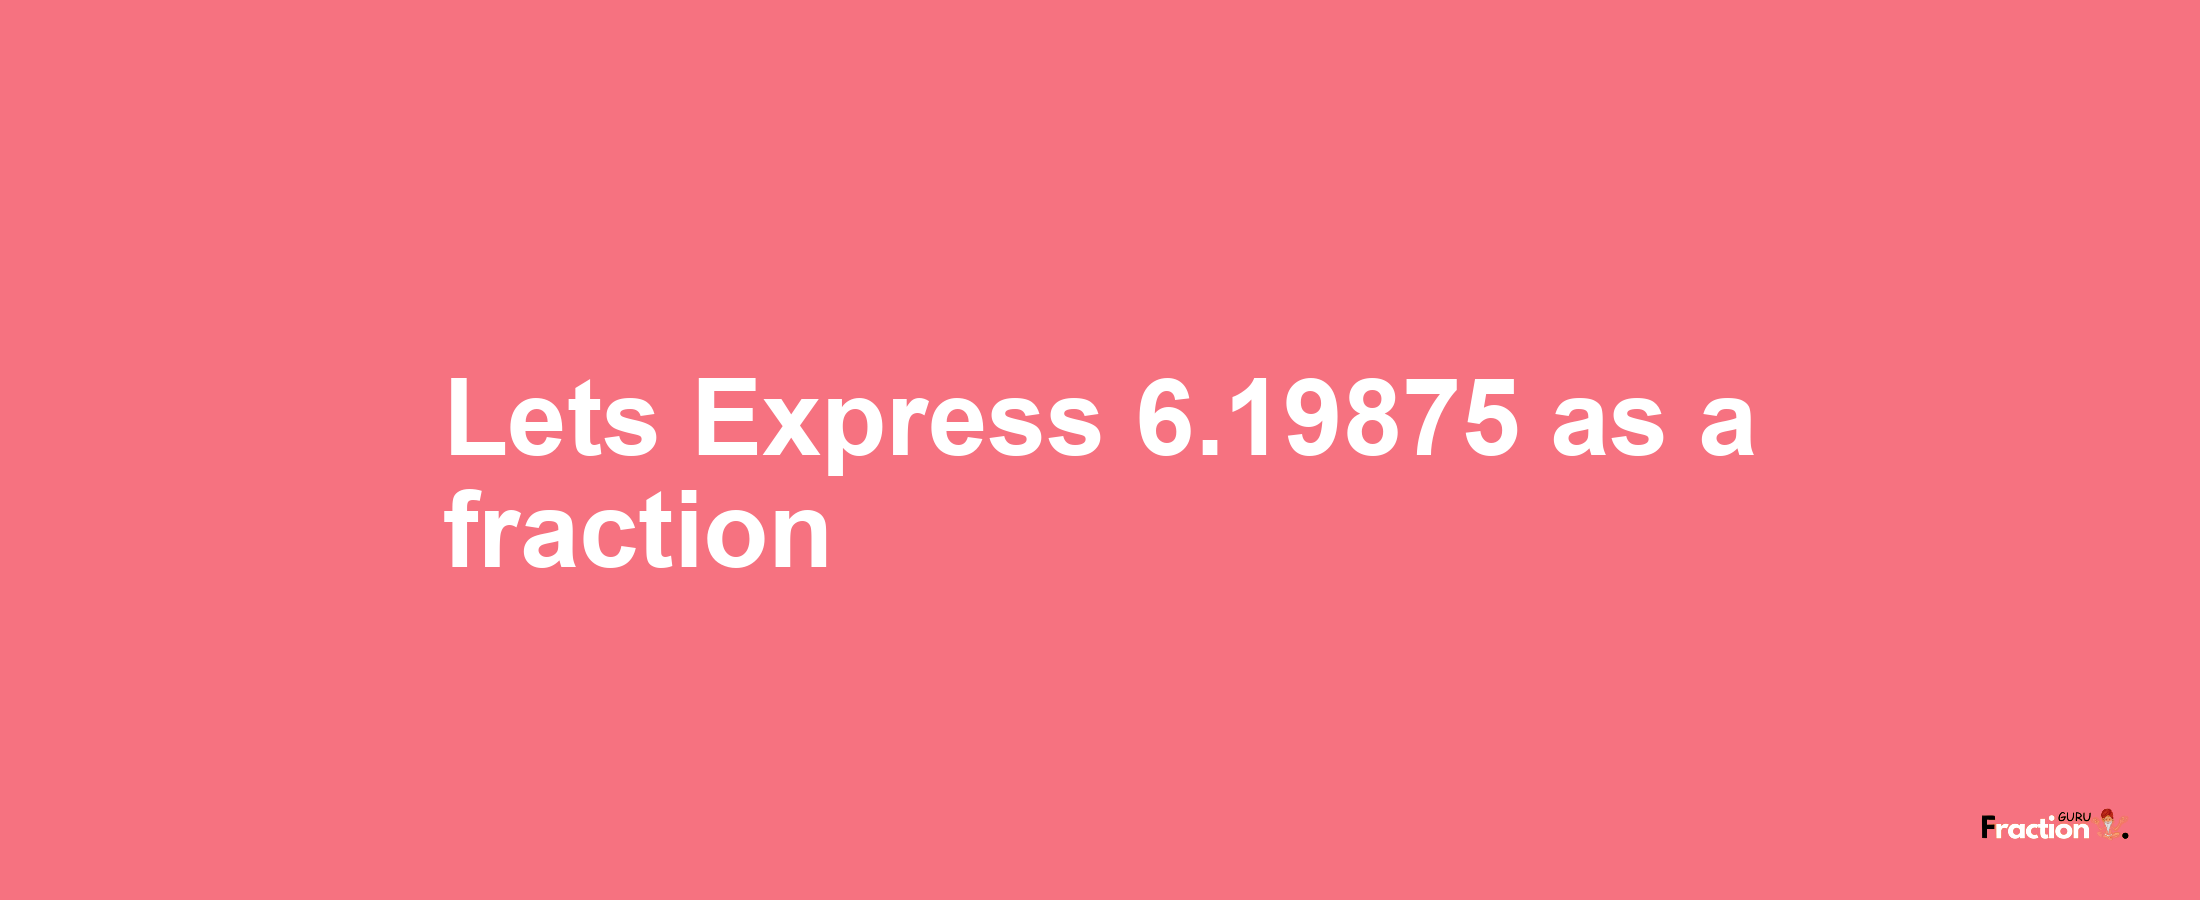 Lets Express 6.19875 as afraction